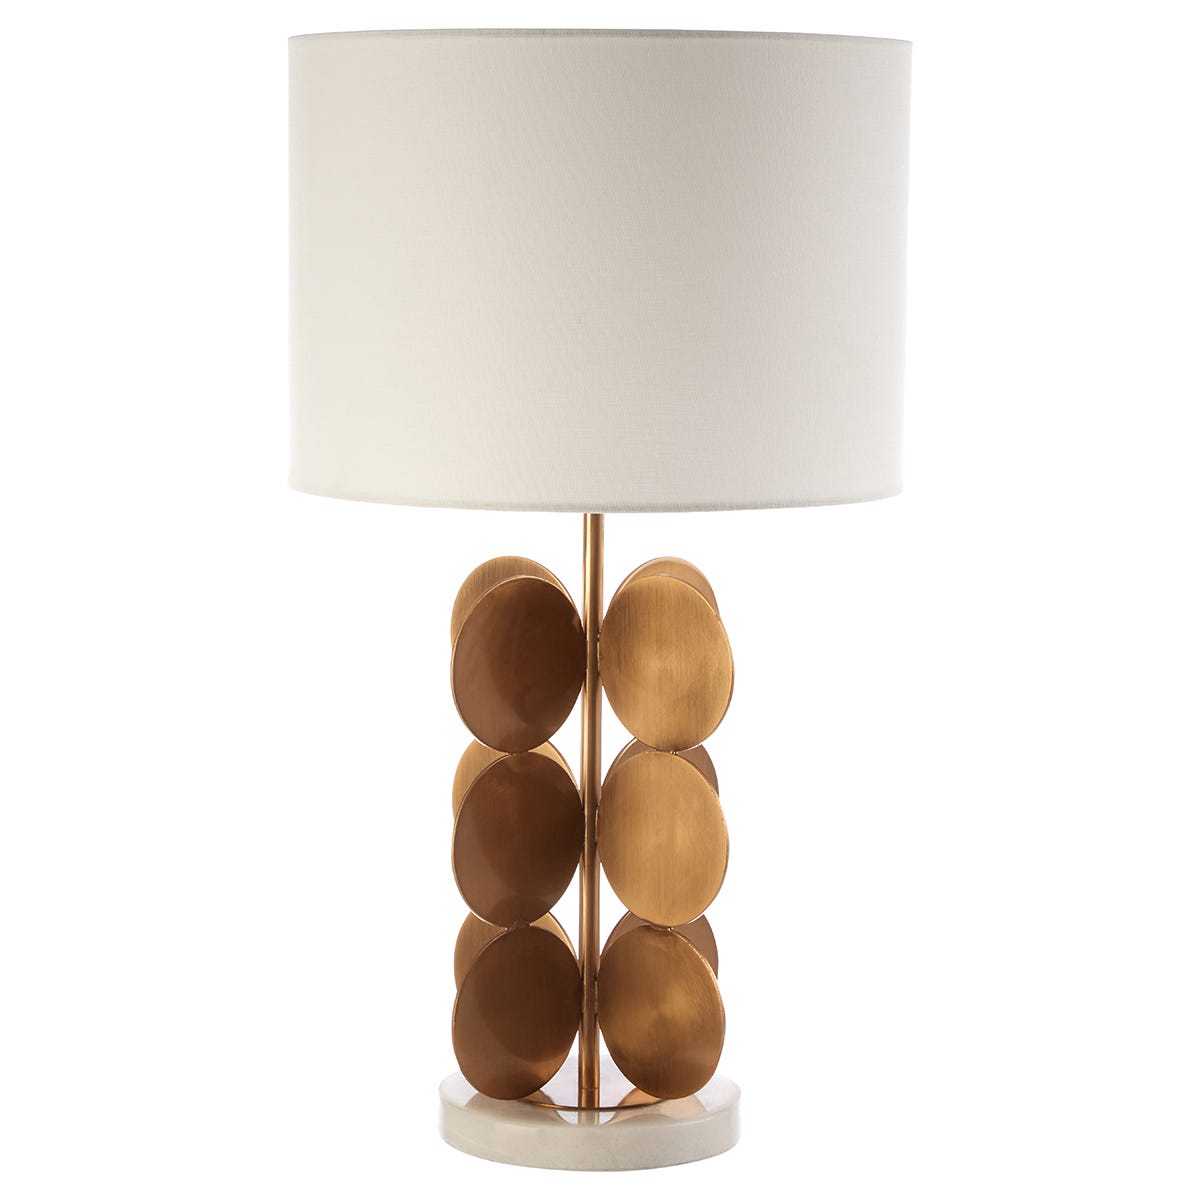 Premier Housewares Zoe Table Lamp in Marble/Gold Finish with White Linen Shade